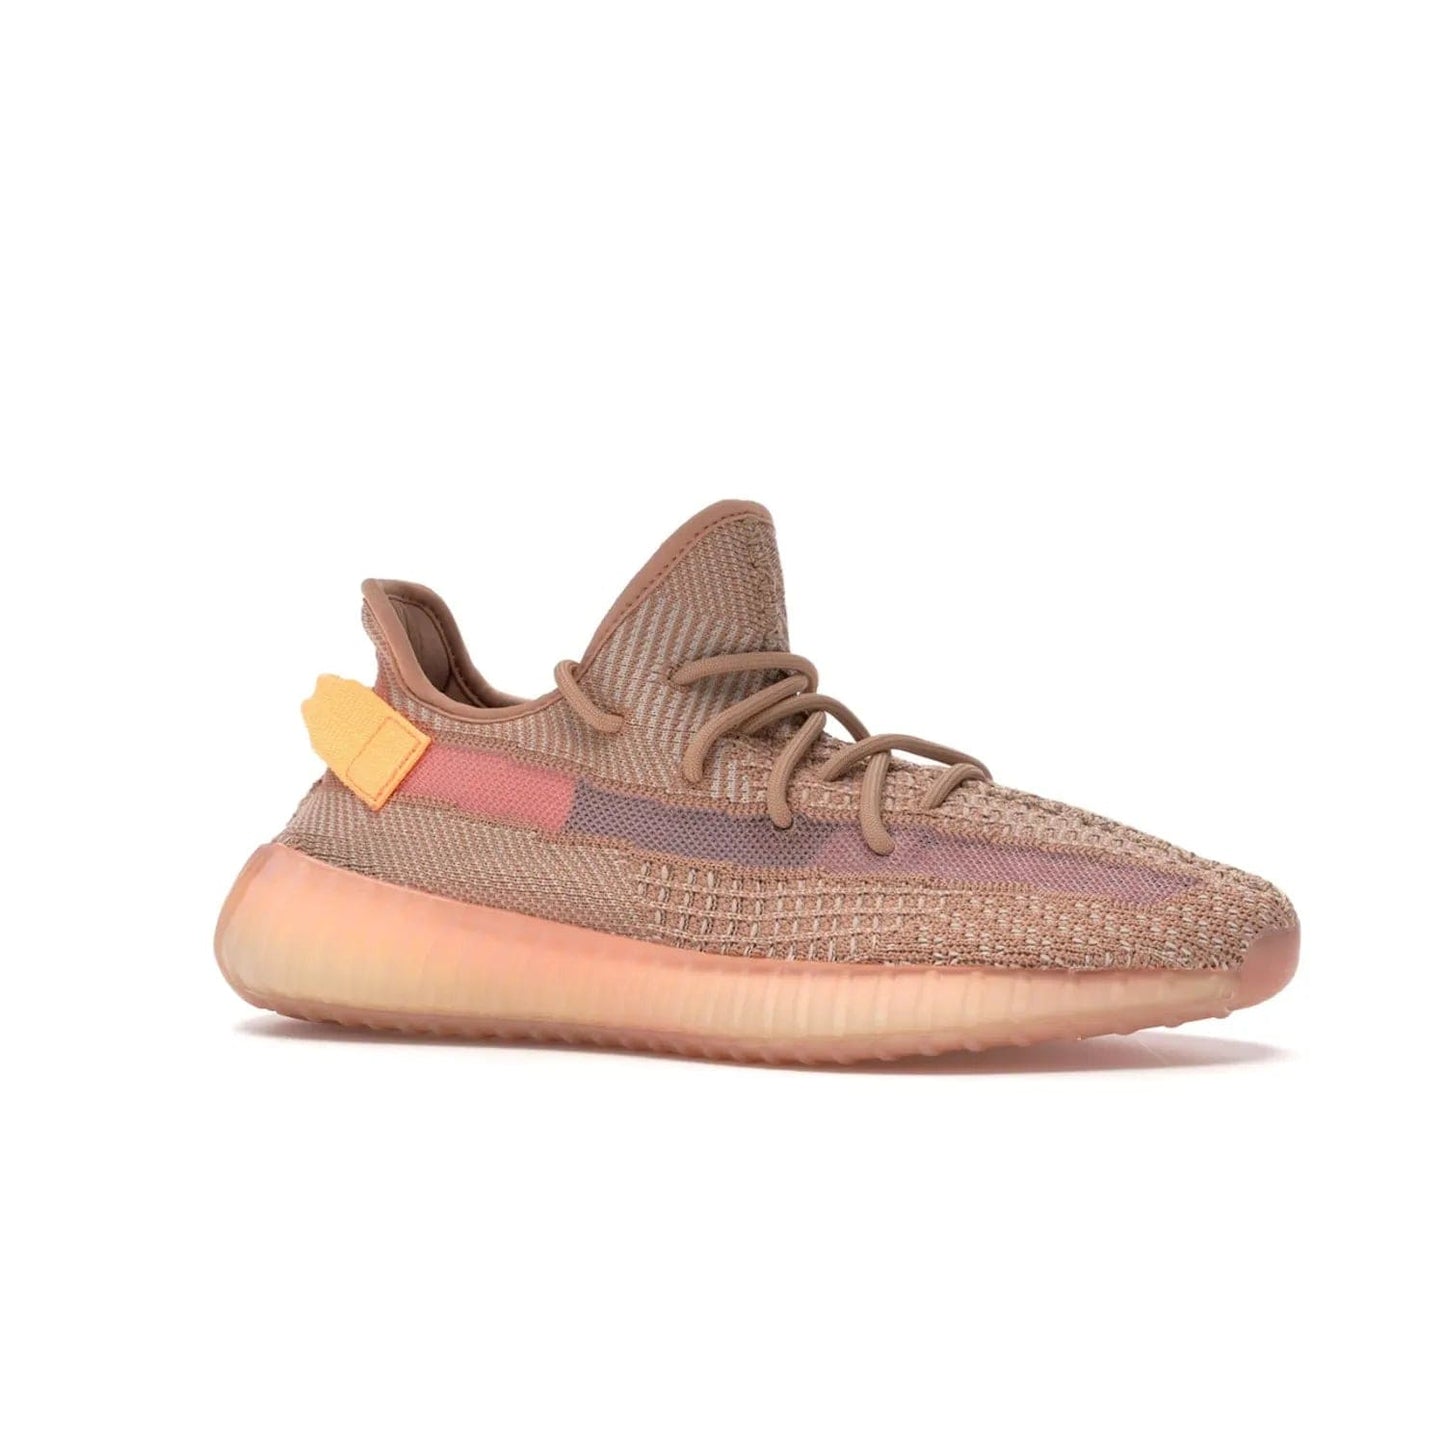 adidas Yeezy Boost 350 V2 Clay - Image 3 - Only at www.BallersClubKickz.com - The adidas Yeezy Boost 350 V2 Clay - style and swag in one shoe. Orange accents, clay midsole and sole. Get yours today!